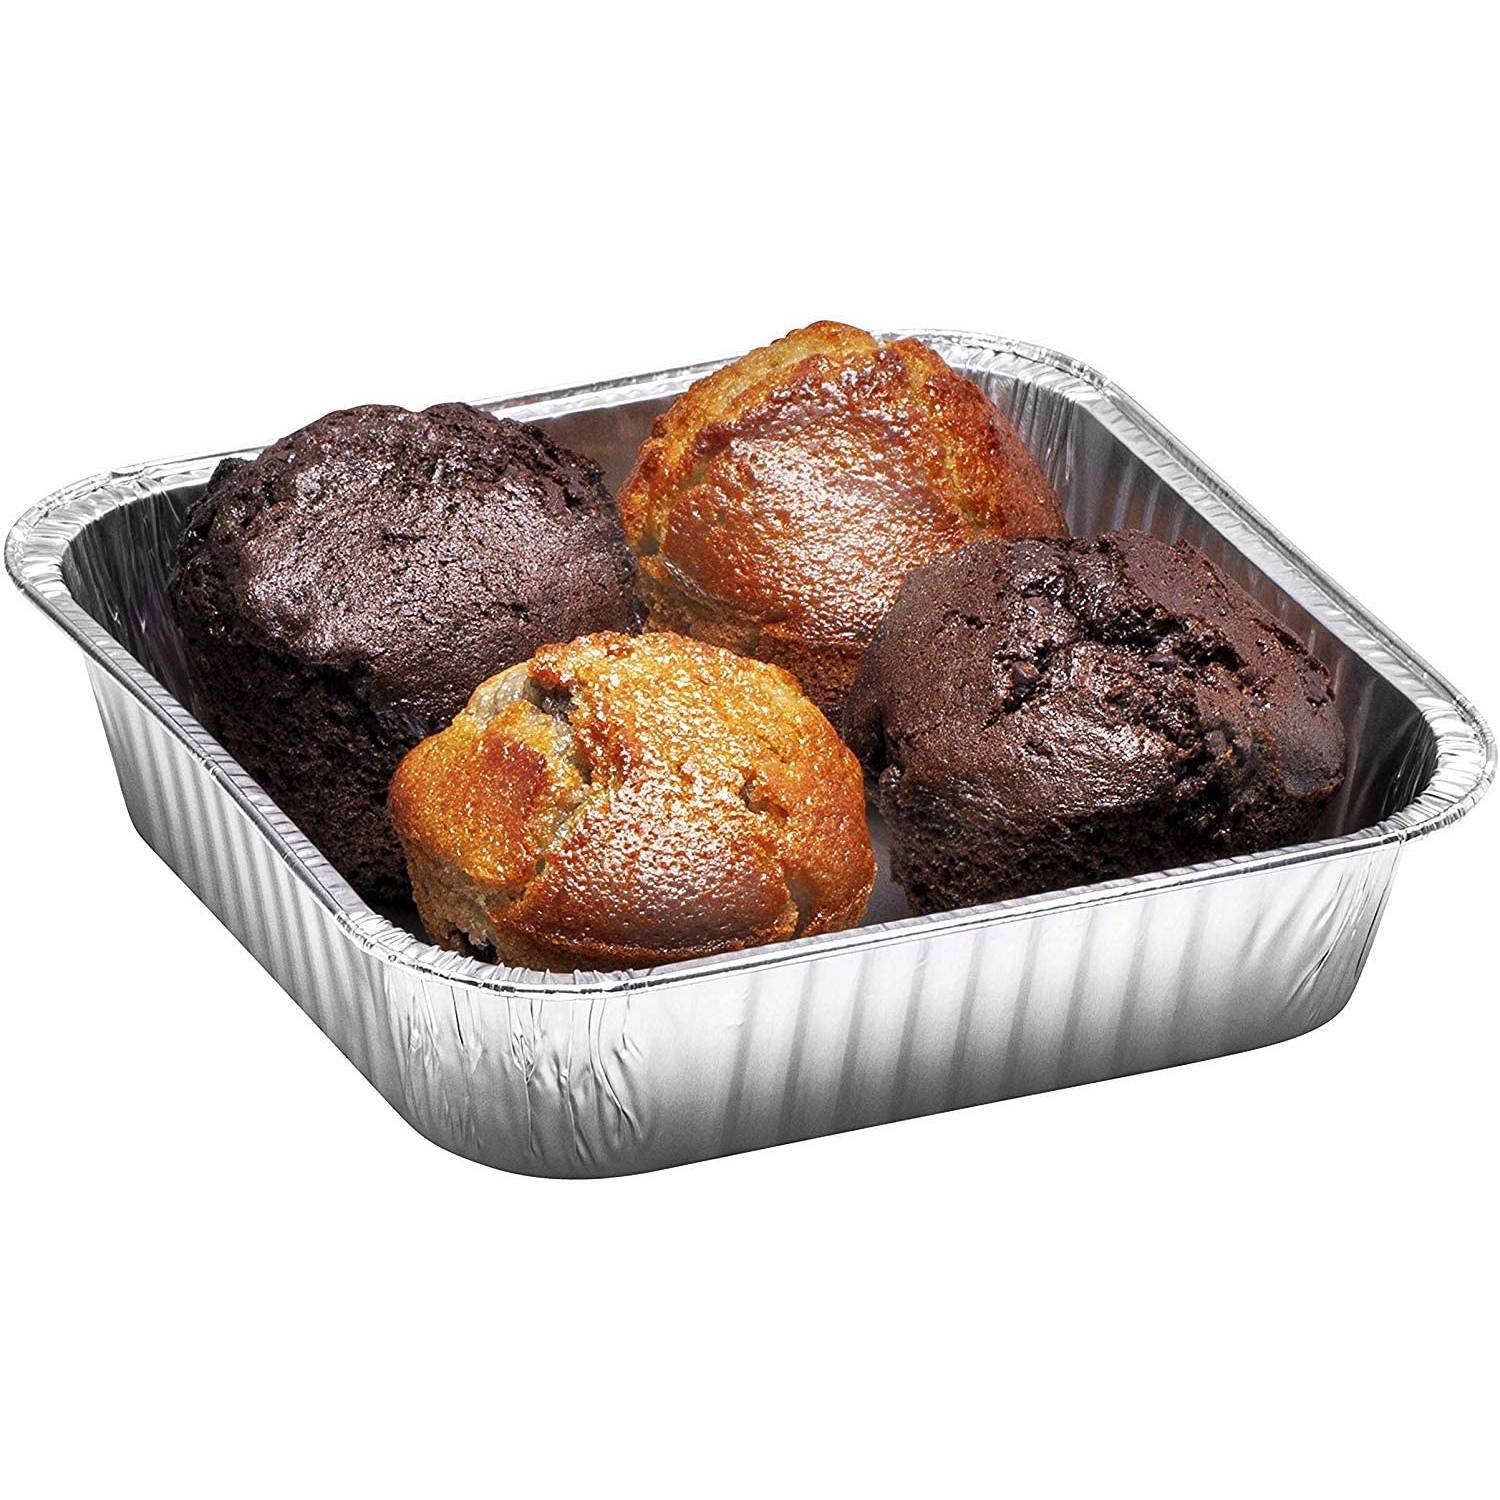 (10 Count) 8 Square Disposable Aluminum Cake Pans - Foil Pans Perfect for Baking Cakes, Roasting, Homemade Breads | 8 x 8 x 2 in with Flat Lids